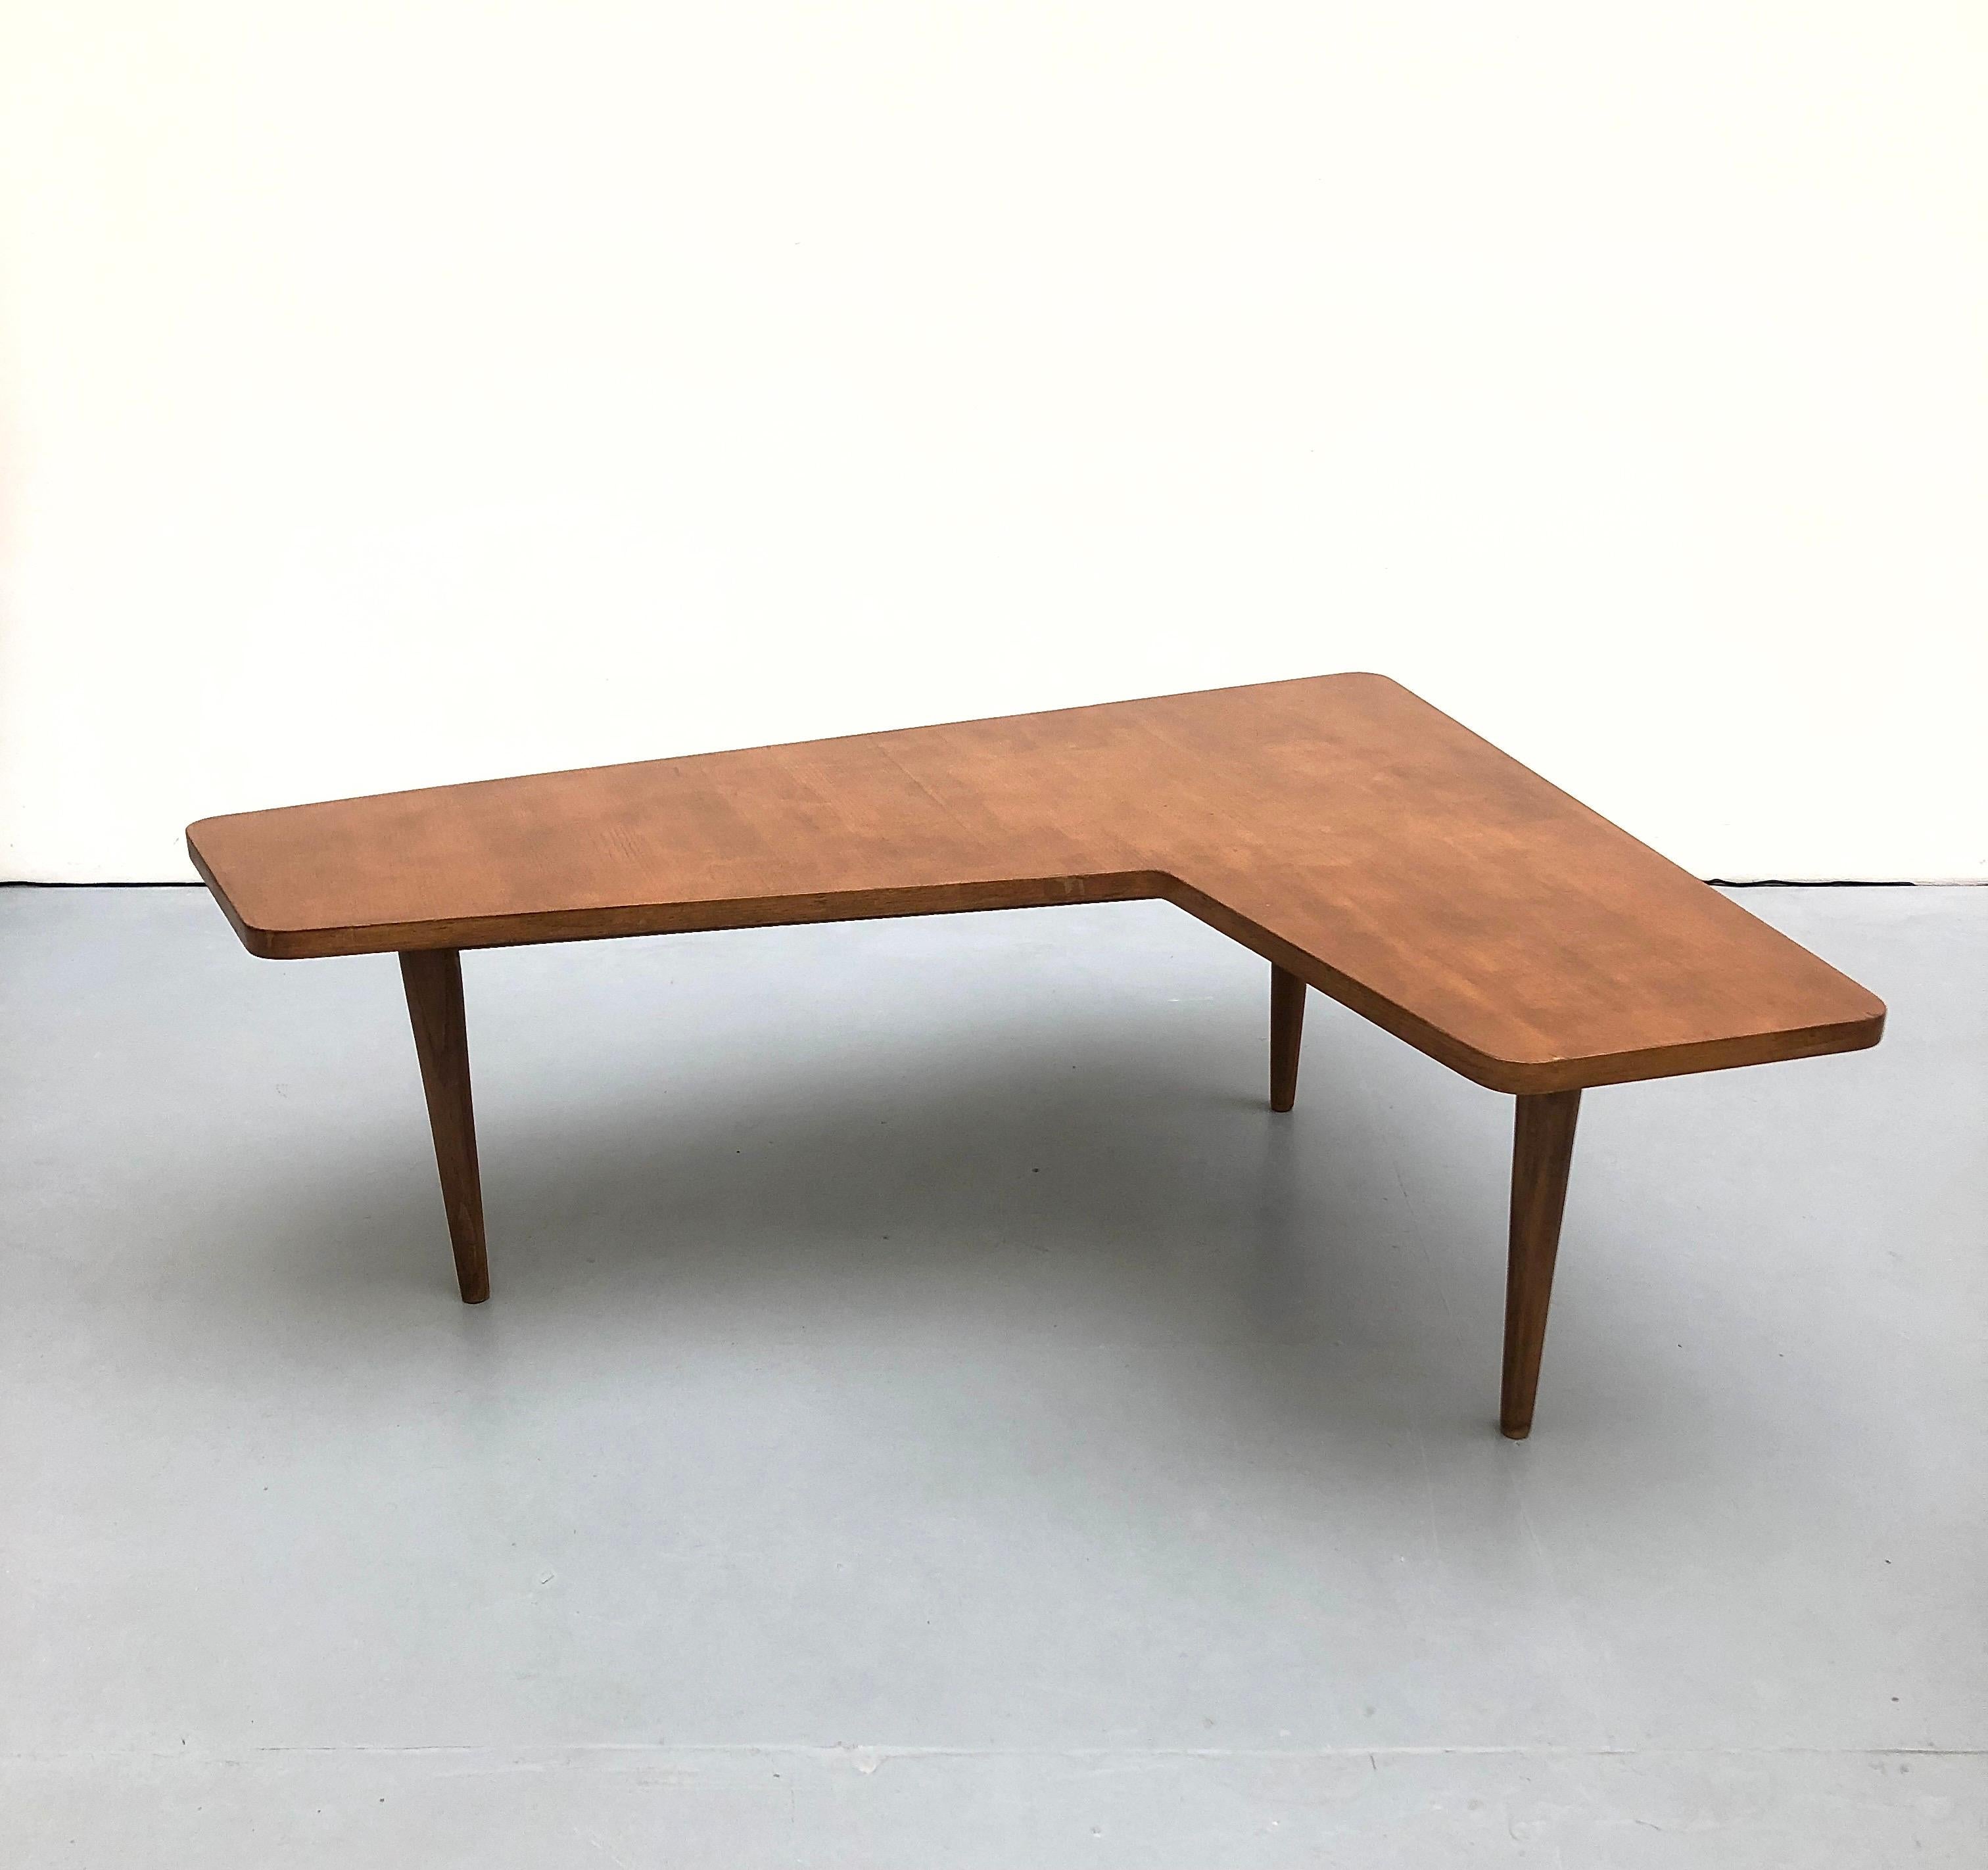 Coffee table by Alain Richard, Charron Groupe 4, 1954.

Alain Richard did not design the cut-out of this table from scratch: an armchair can easily be fitted into it and its occupant then has a very large surface to place books, papers, ashtrays,